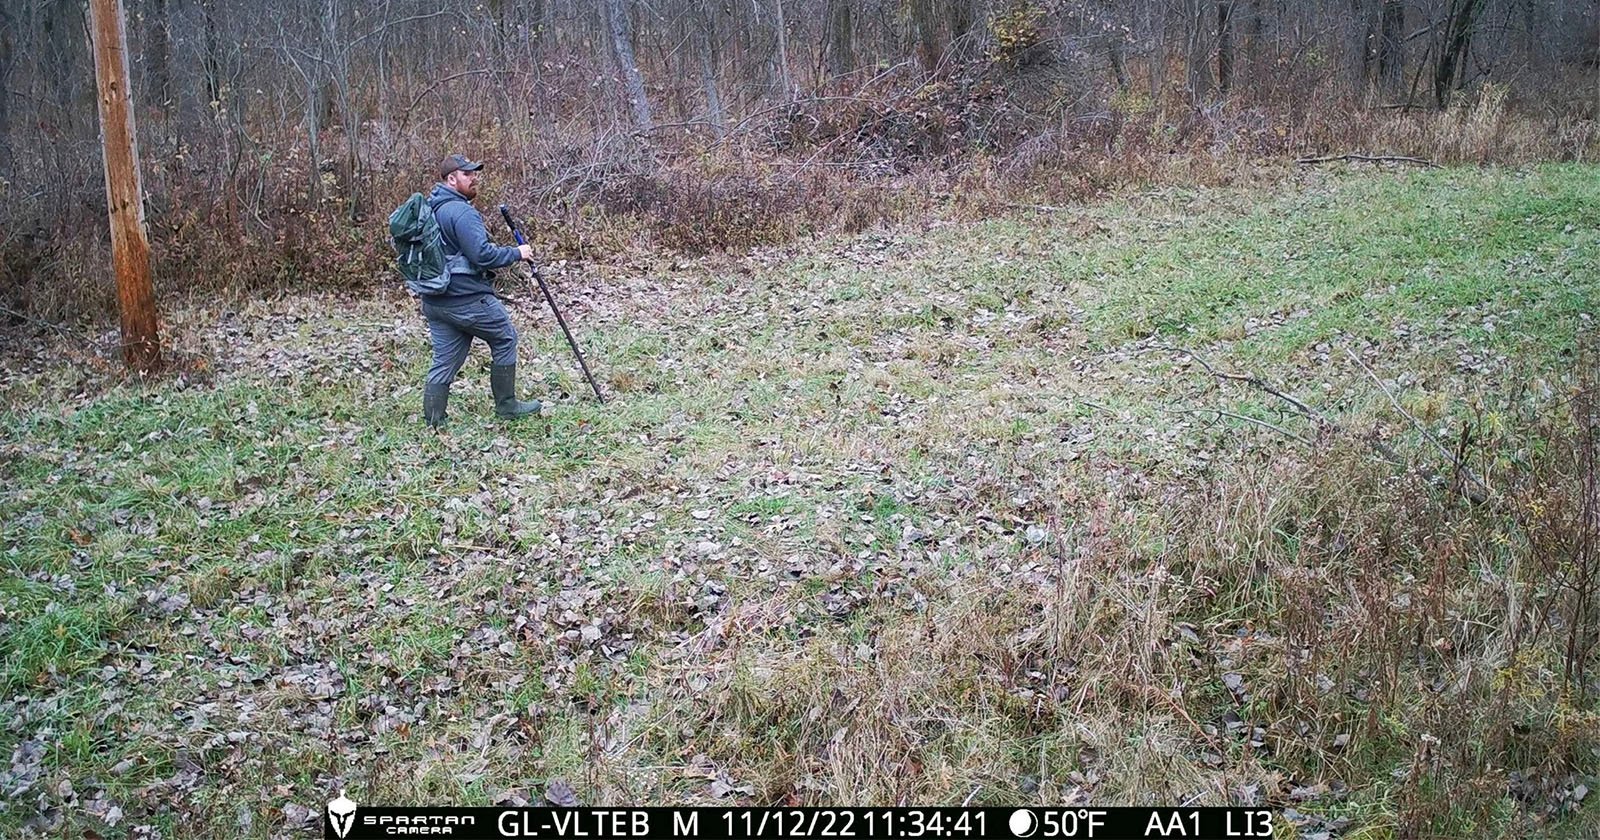 Hunters Posed as Nature Photographers to Illegally Take Deer